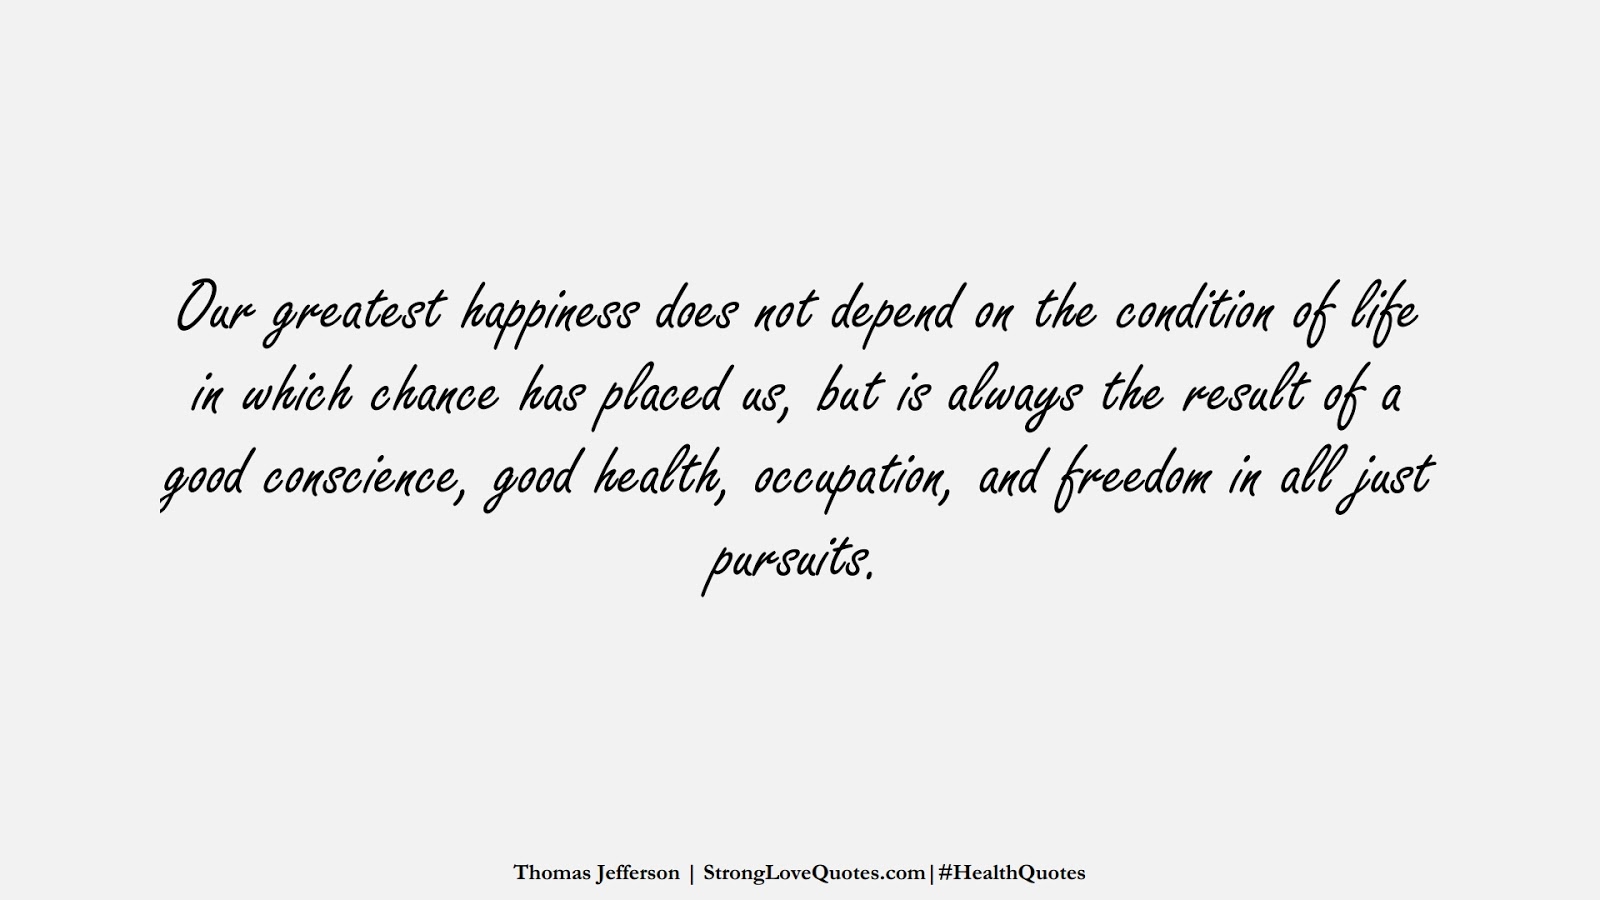 Our greatest happiness does not depend on the condition of life in which chance has placed us, but is always the result of a good conscience, good health, occupation, and freedom in all just pursuits. (Thomas Jefferson);  #HealthQuotes